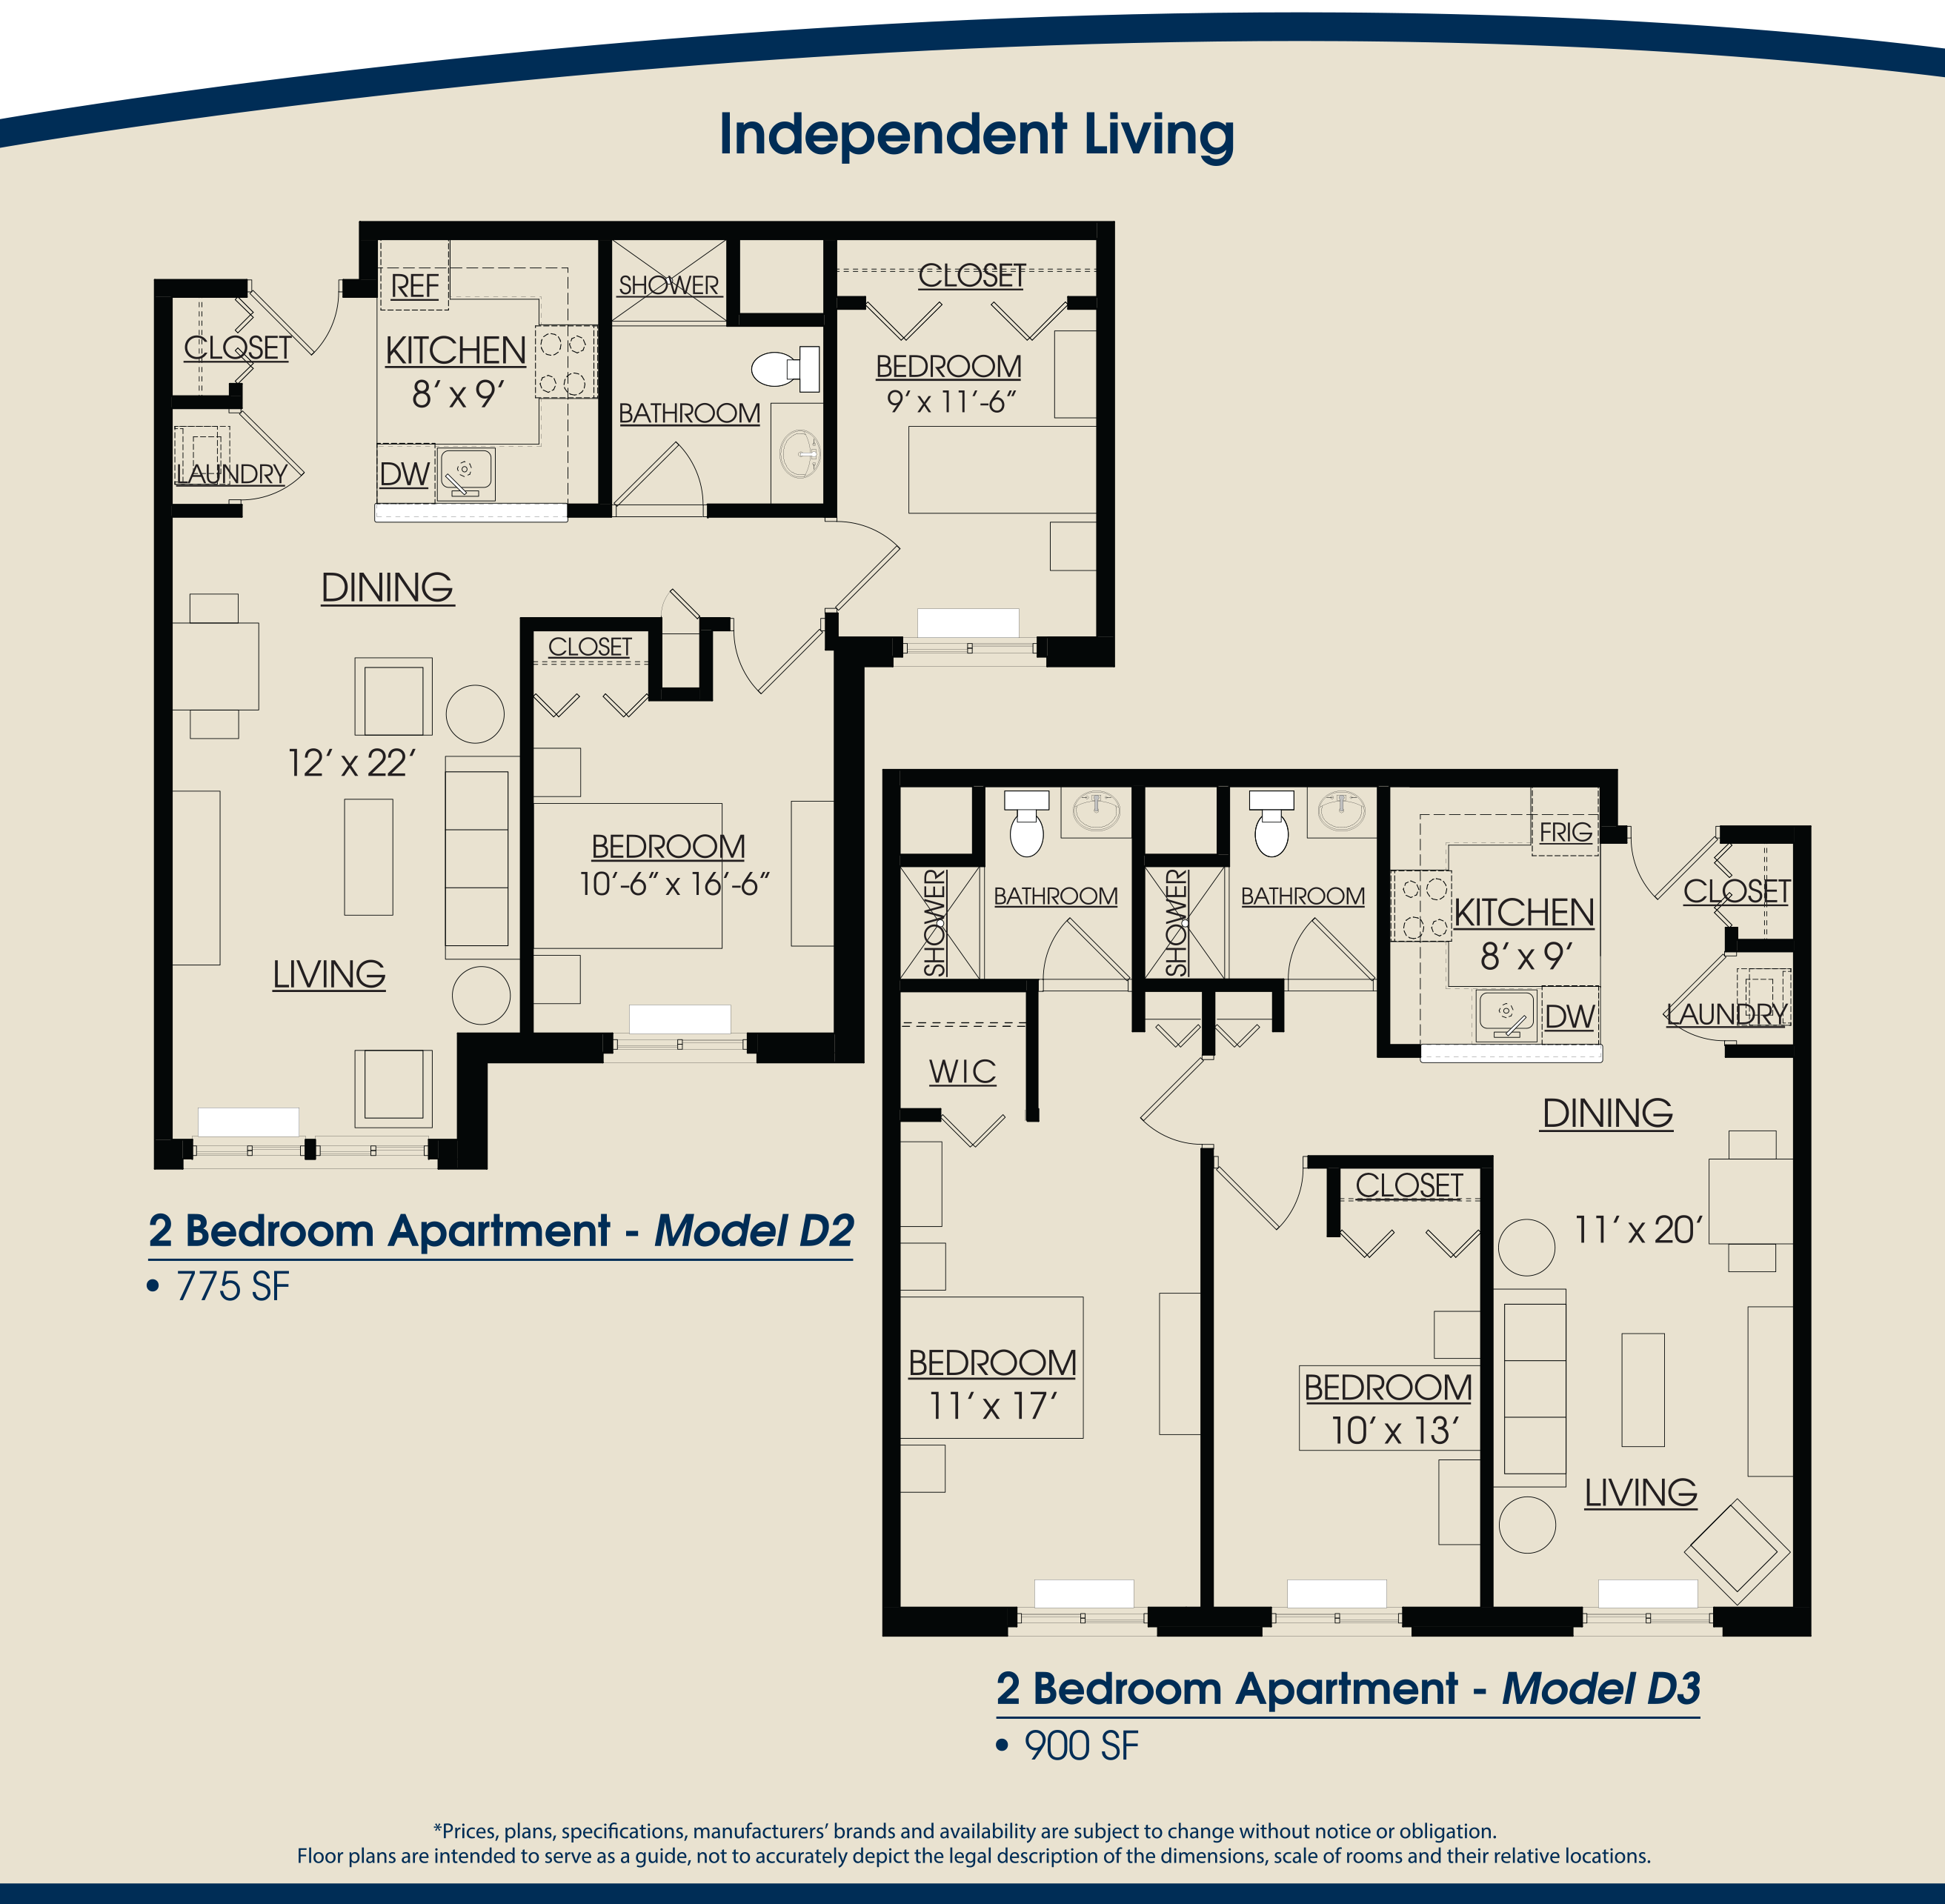 2 Bedroom Apartment Floor Plan With Dimensions - Home Design Ideas